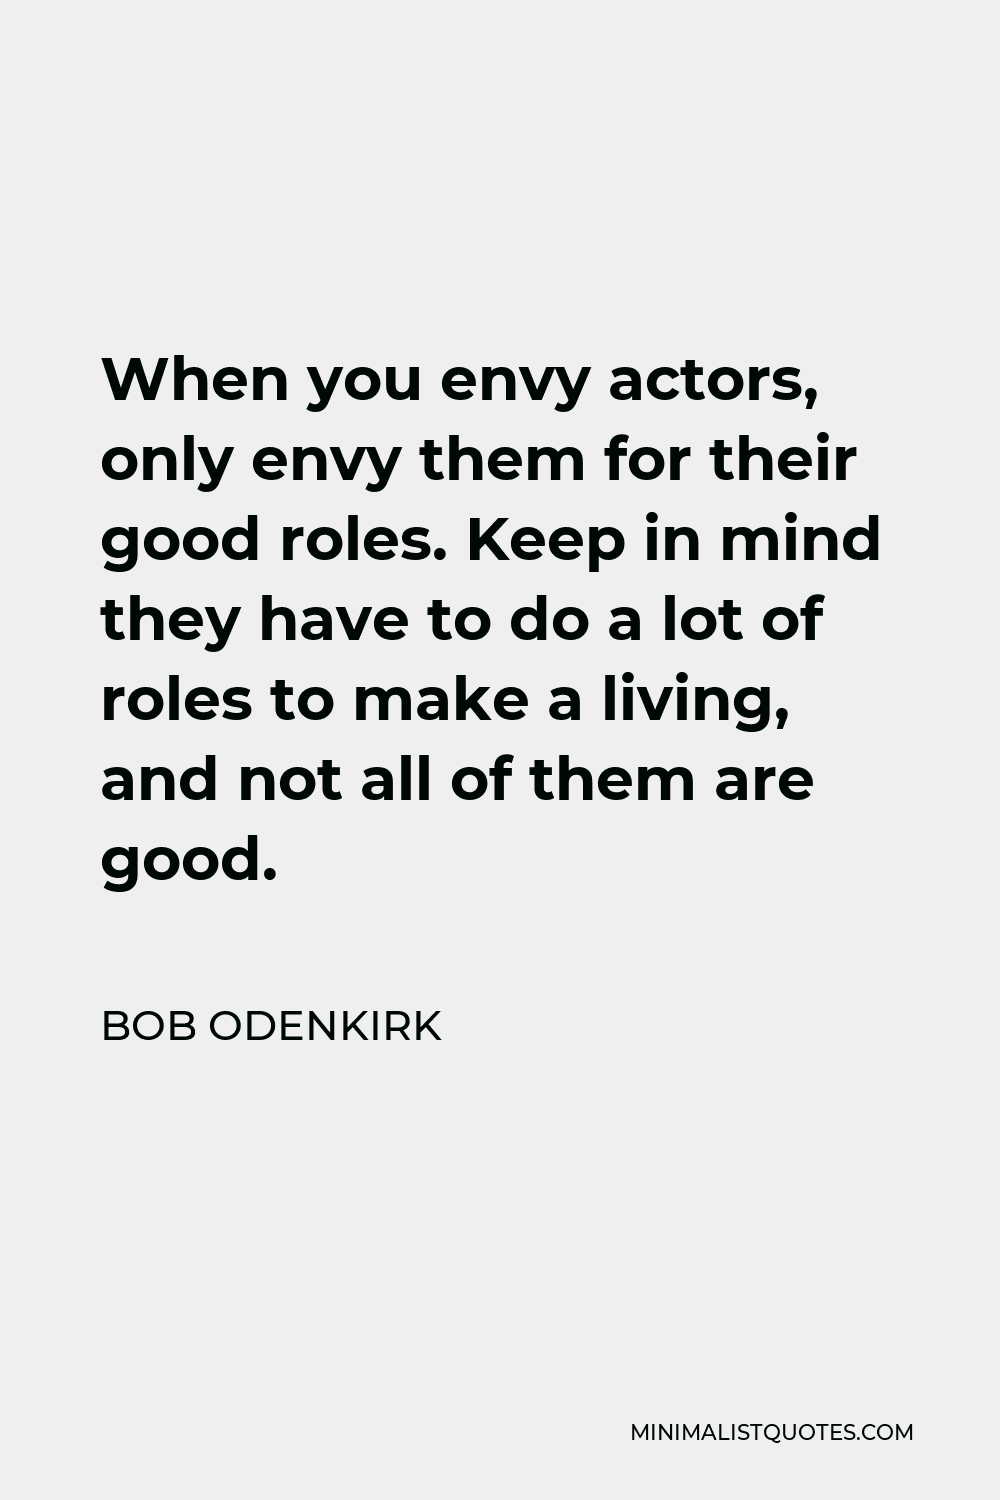 Bob Odenkirk Quote - When you envy actors, only envy them for their good roles. Keep in mind they have to do a lot of roles to make a living, and not all of them are good.